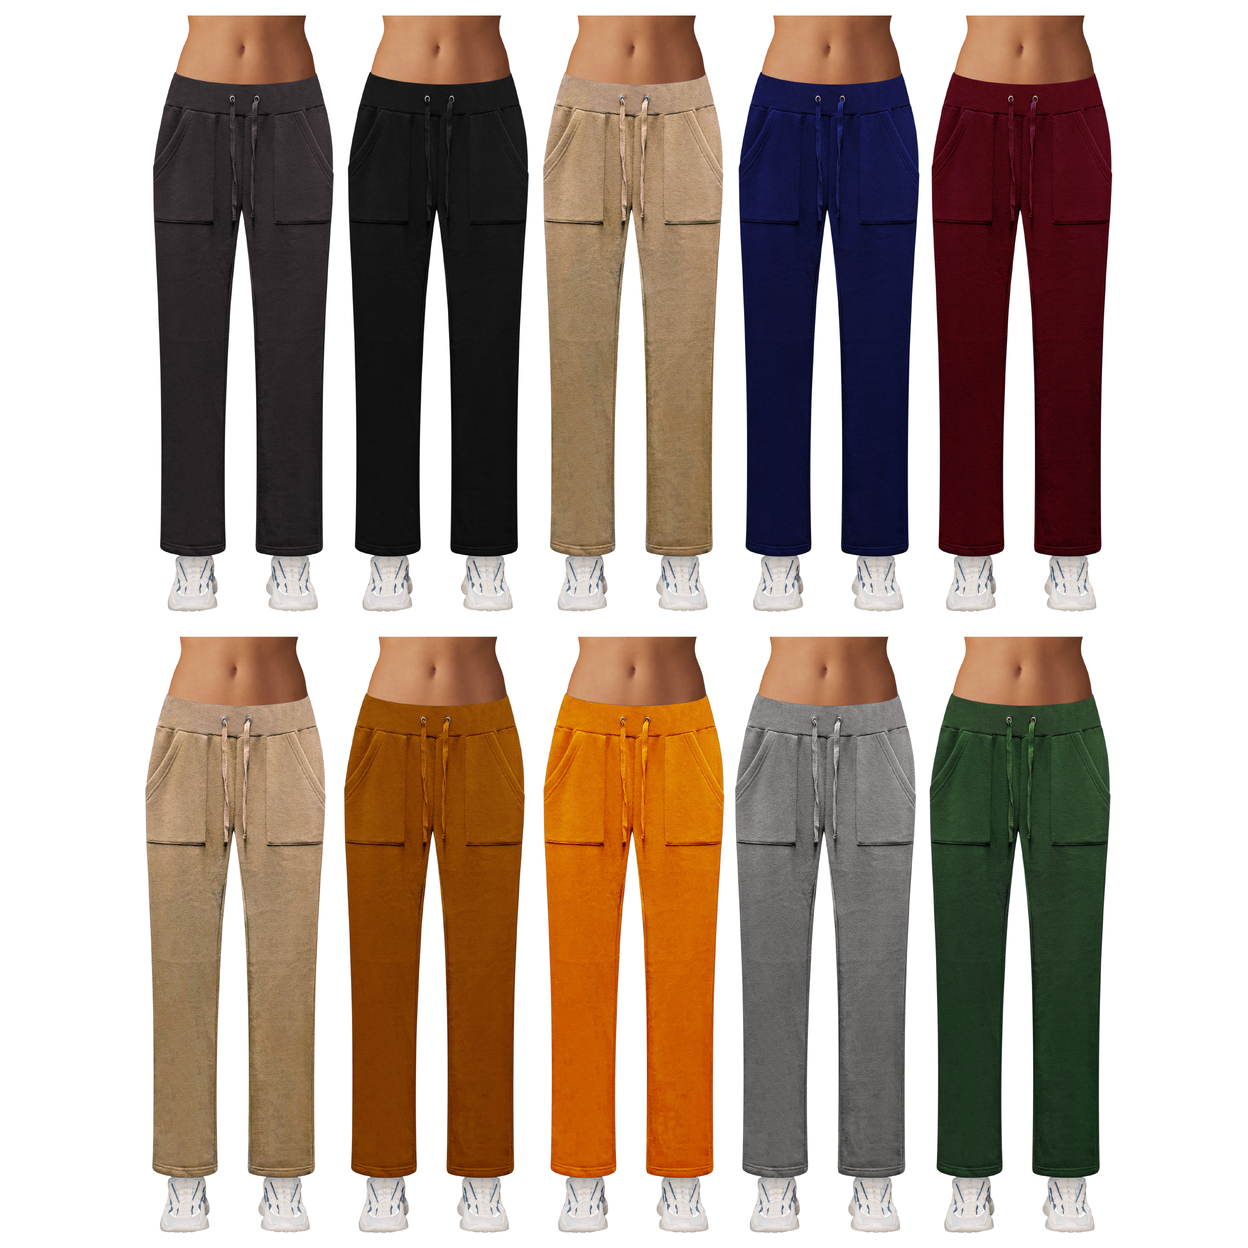 2-Pack: Women's Ultra-Soft Cozy Fleece Lined Elastic Waistband Terry Knit Pants - Assorted, Xx-large